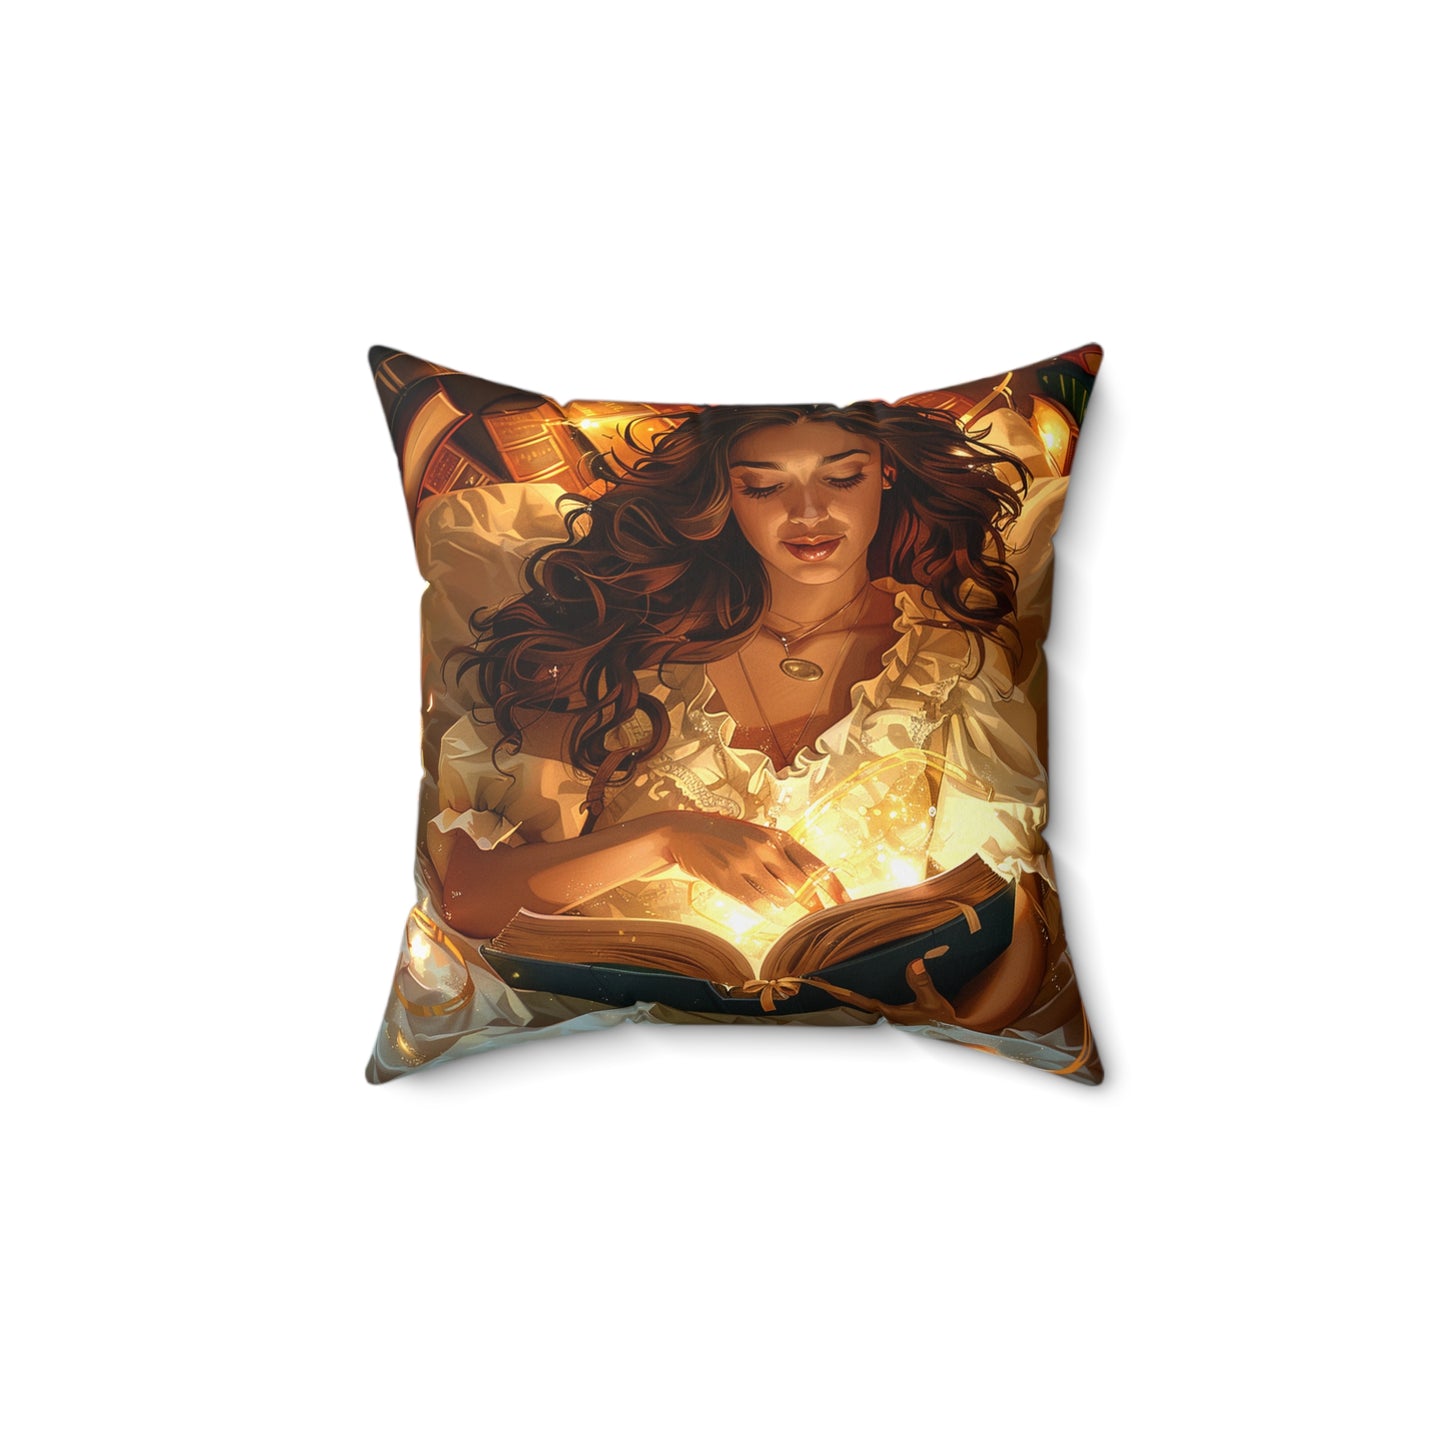 The Bookish Babe Pillow